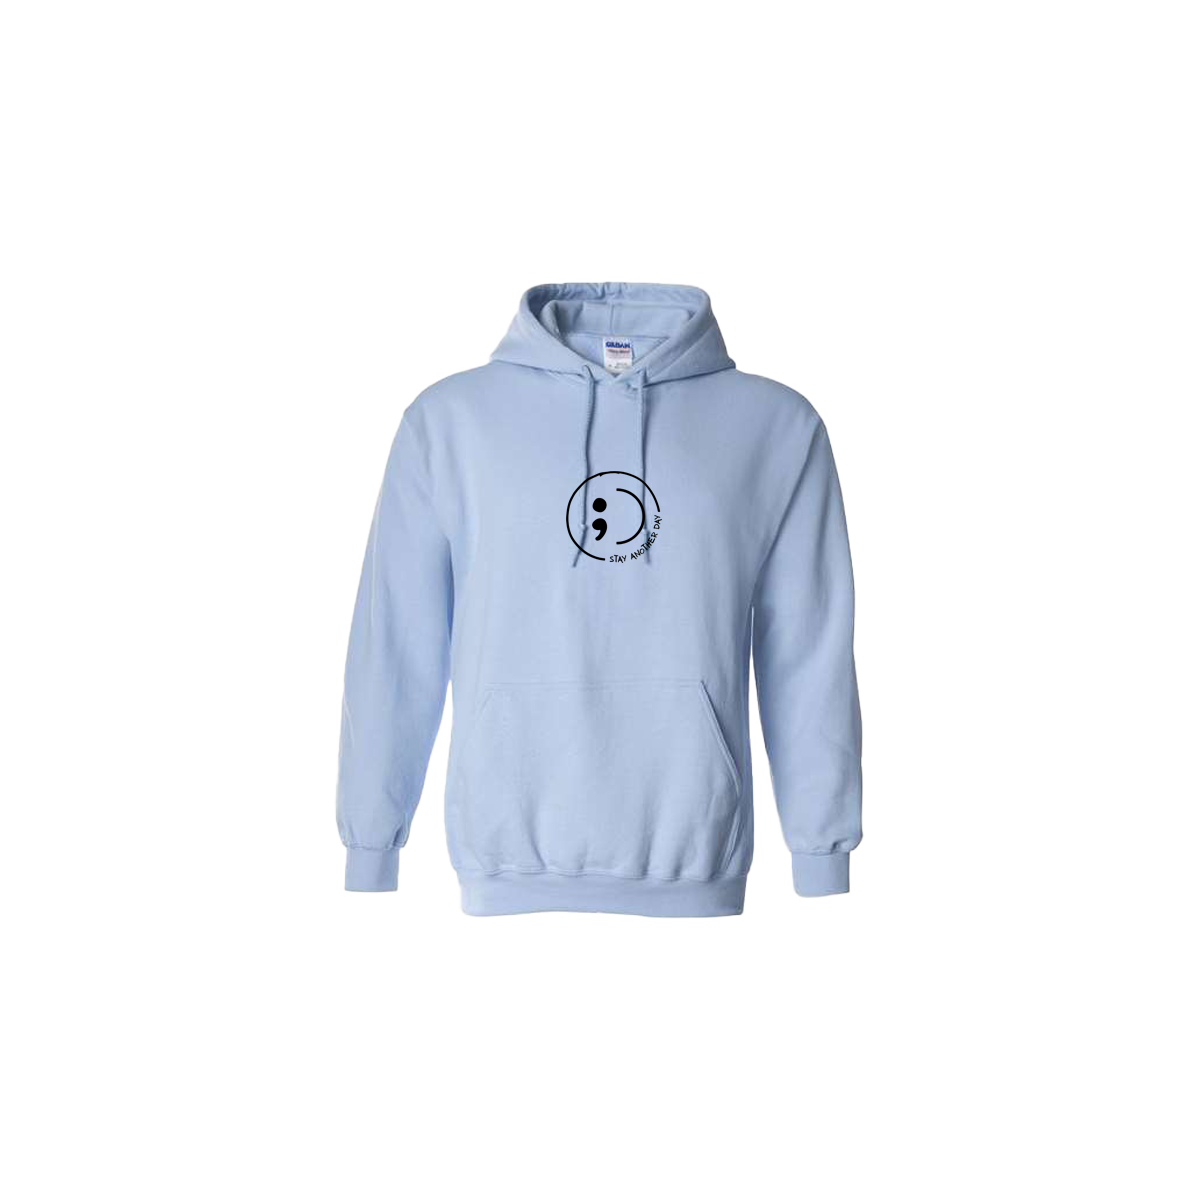 Stay Another Day Smiley with text Embroidered Light Blue Hoodie - Mental Health Awareness Clothing